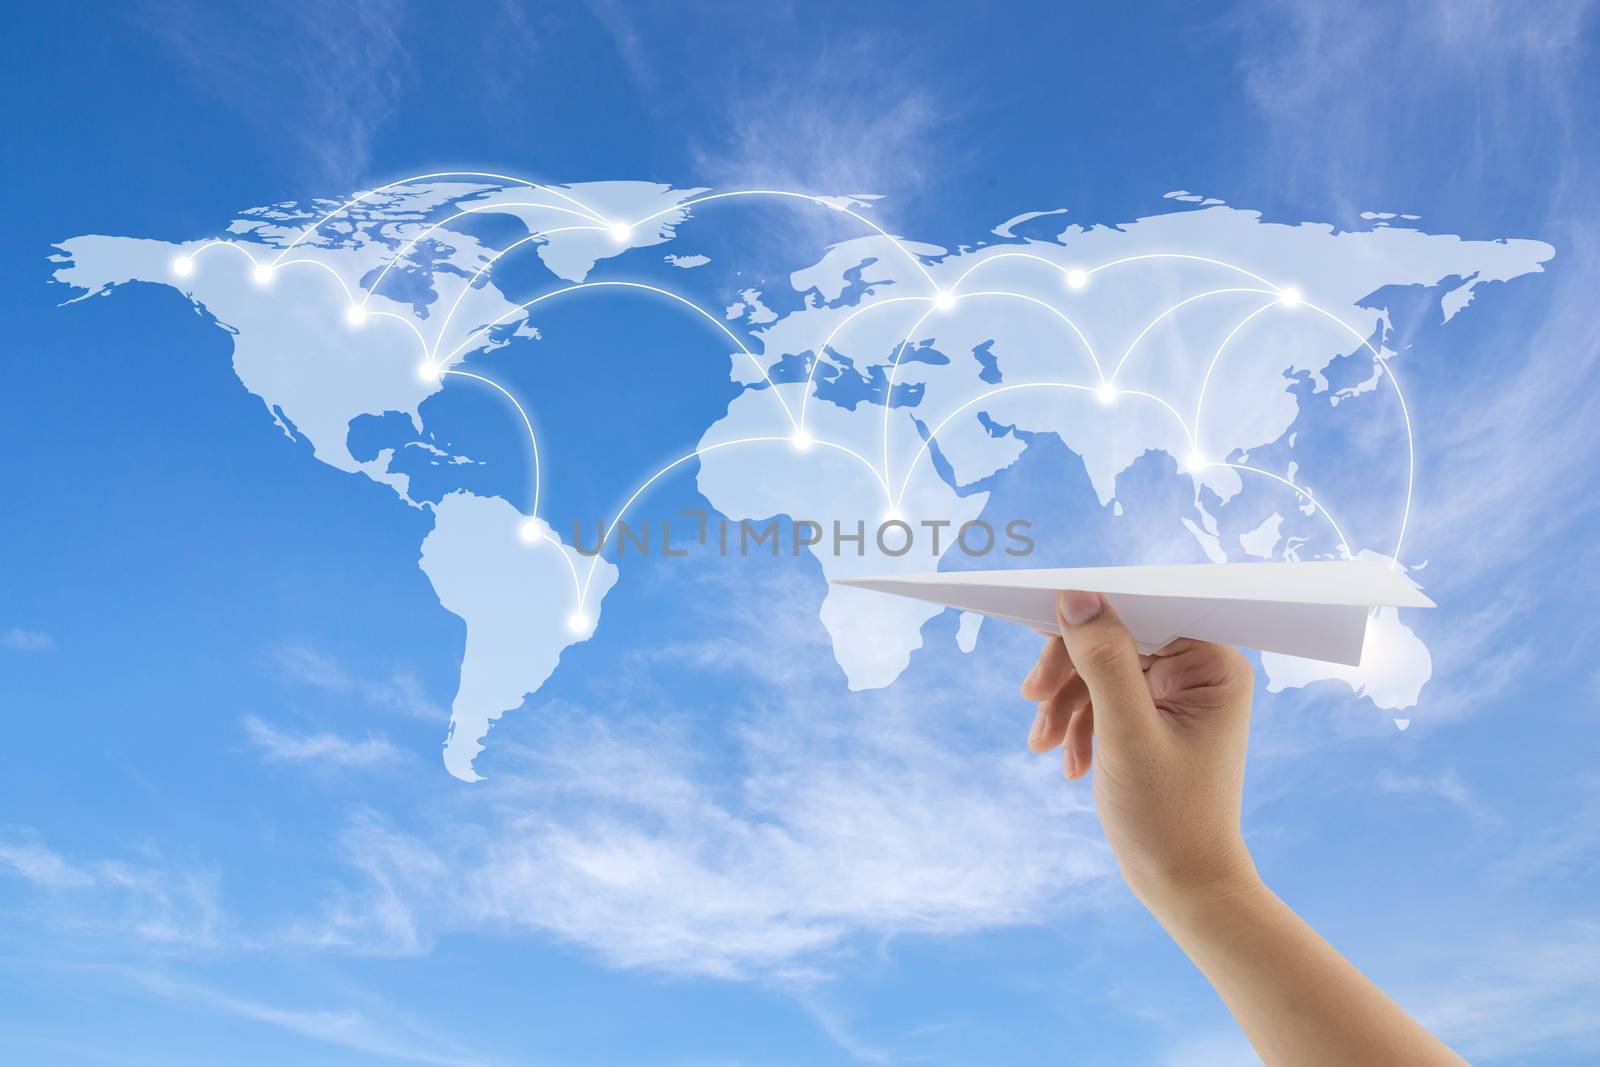 plane in hand with world map on background, Map of flight routes airplanes network use for global travel, import,export,logistics network concept, Elements of this image furnished by NASA